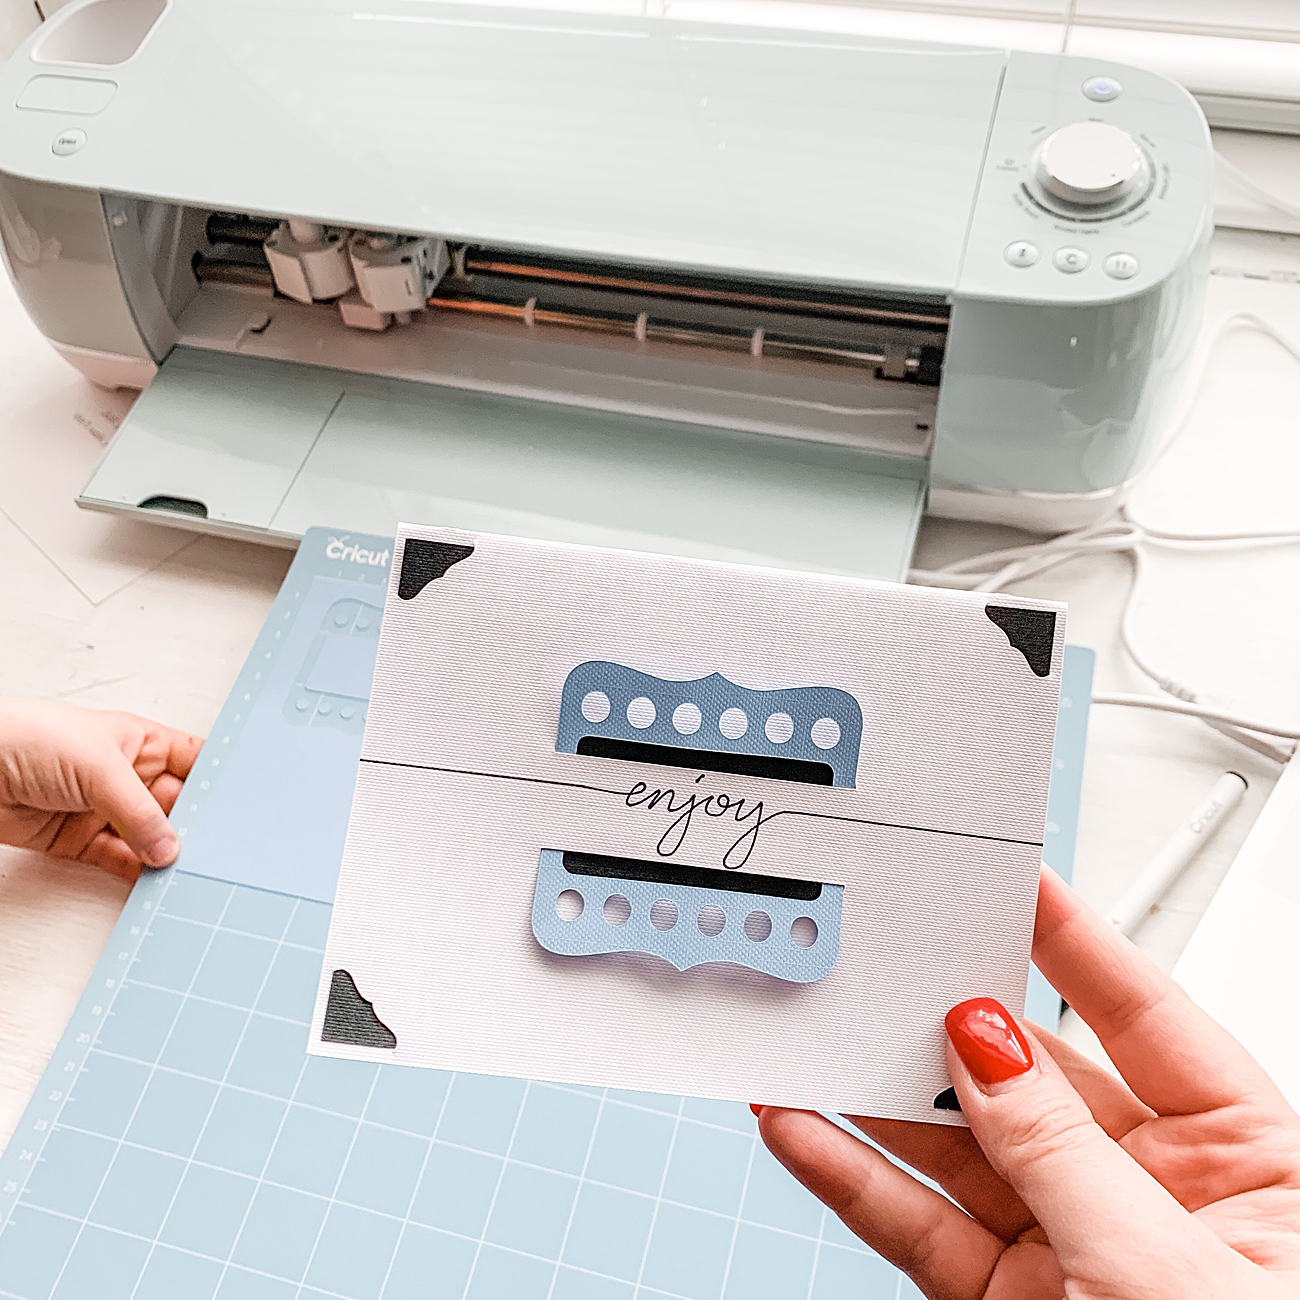 A Newbie's Guide to the Cricut Explore Air 2 | Product Review